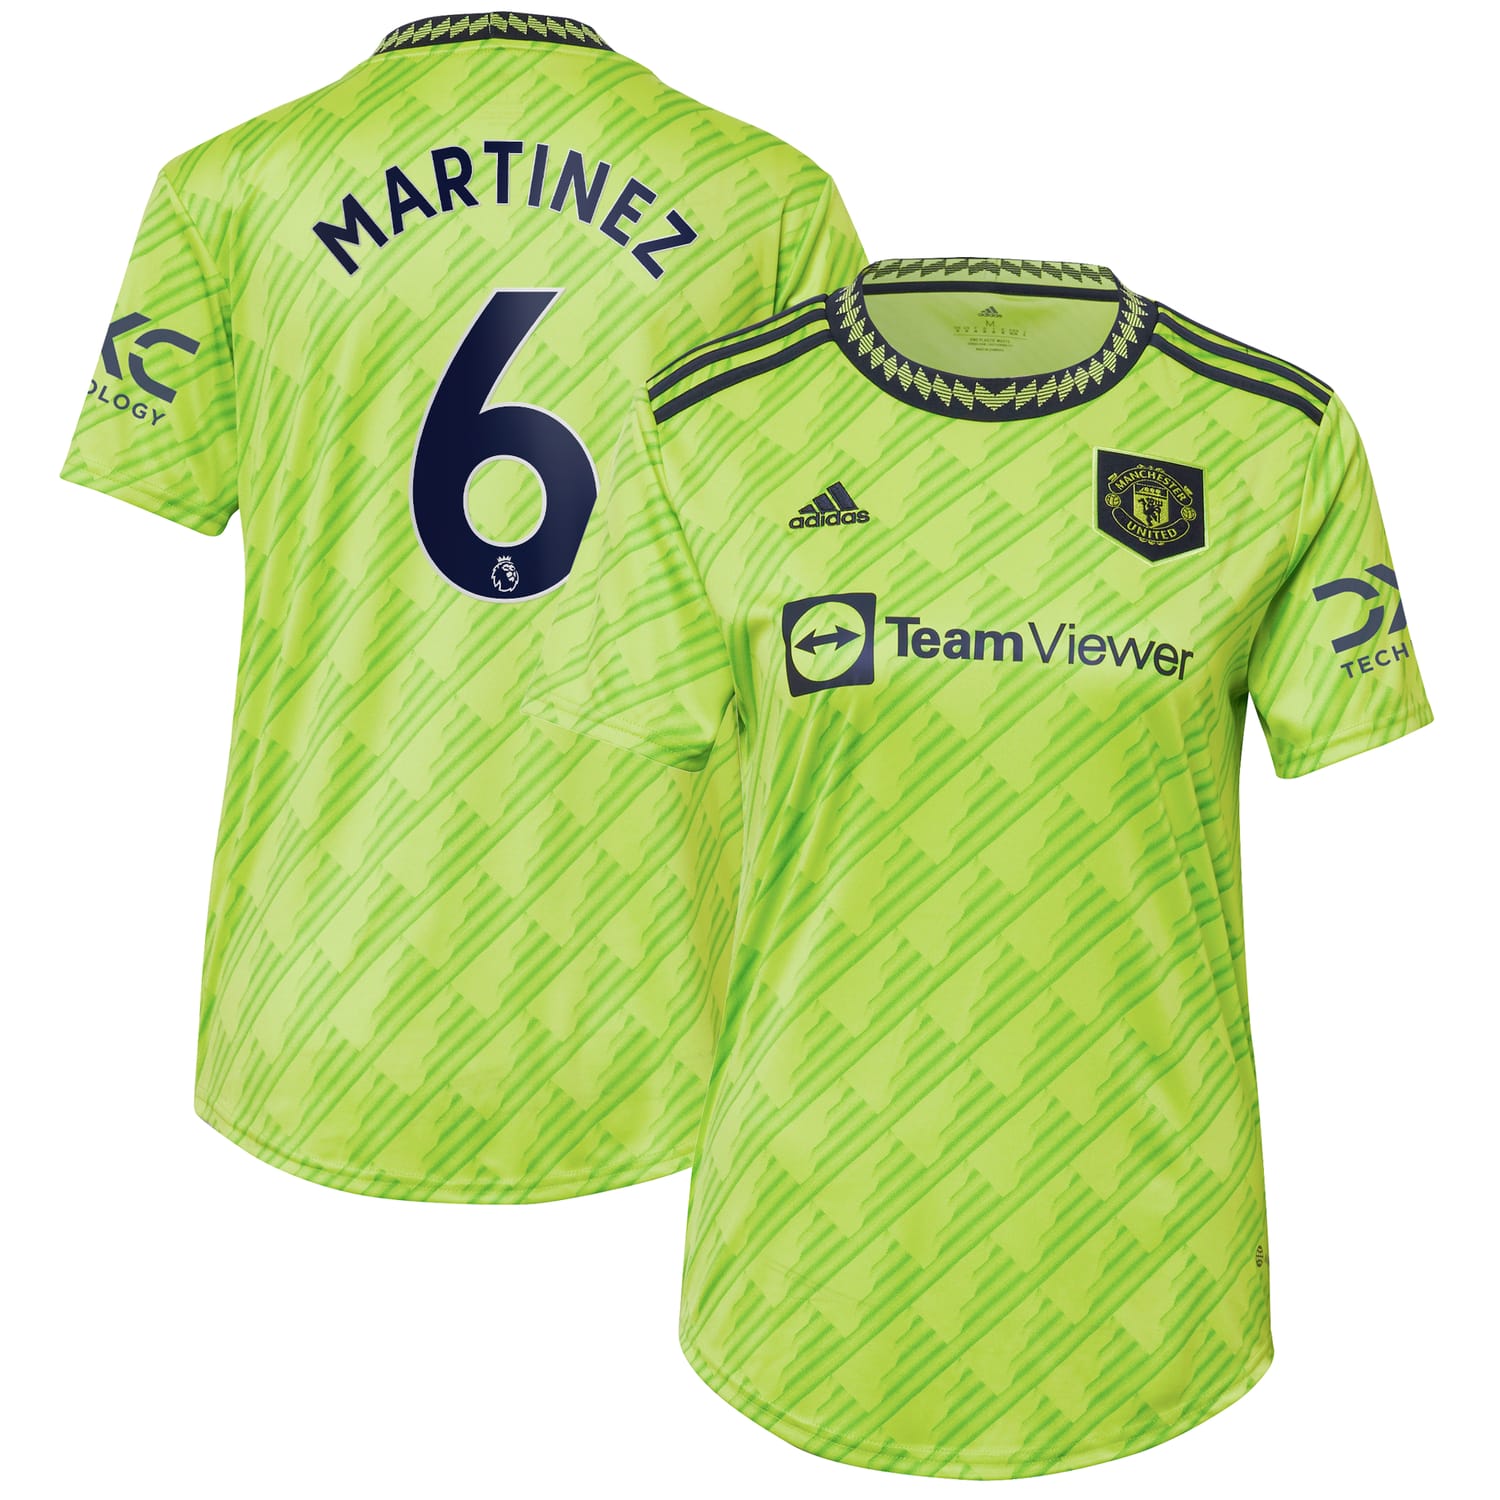 Premier League Manchester United Third Jersey Shirt 2022-23 player Lisandro Martínez 6 printing for Women